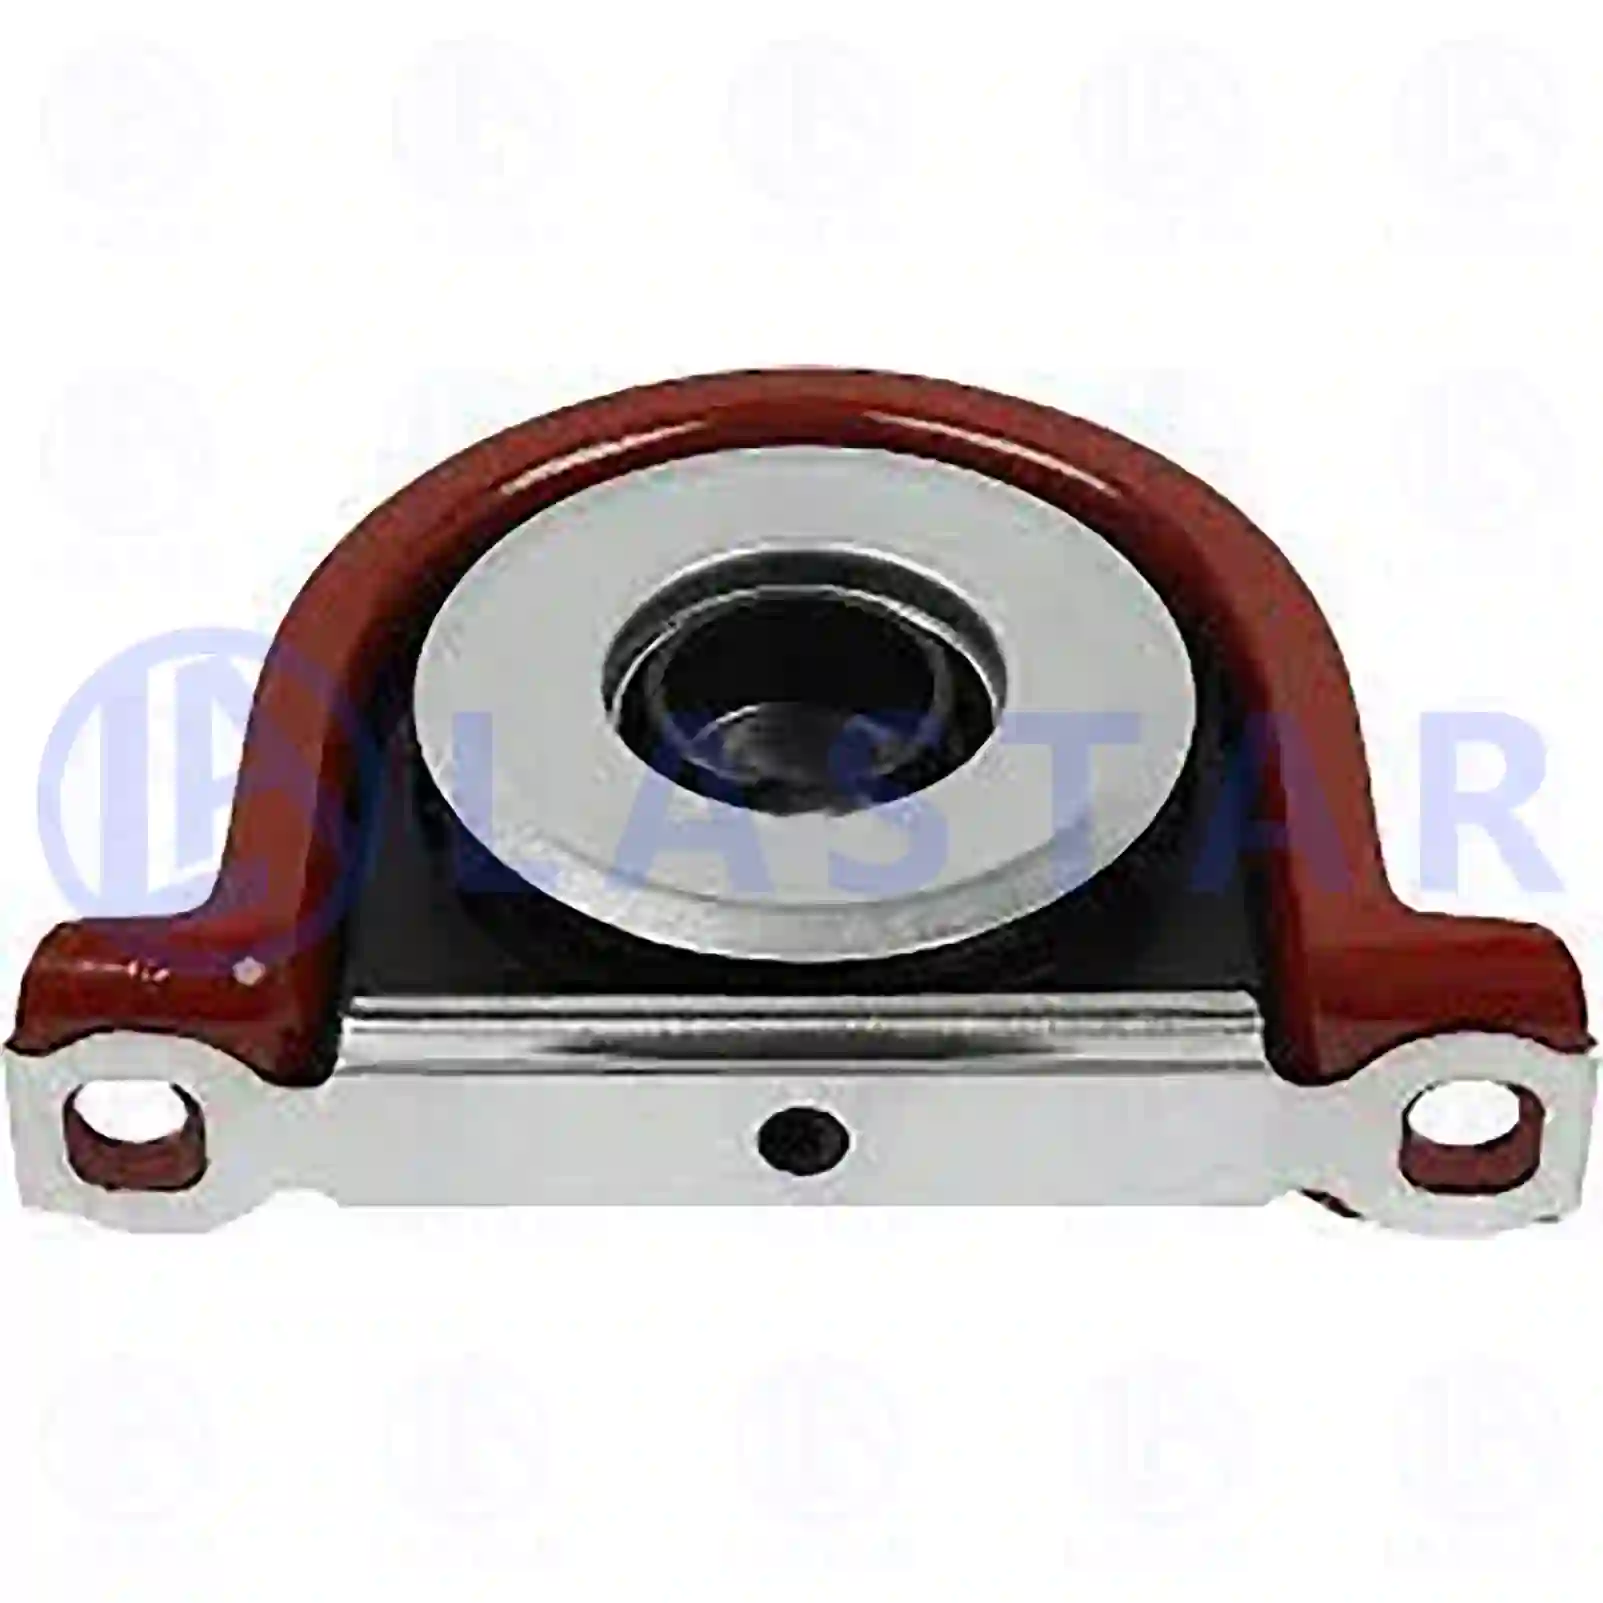 Support Bearing Center bearing, la no: 77734126 ,  oem no:42536726, 9316032 Lastar Spare Part | Truck Spare Parts, Auotomotive Spare Parts